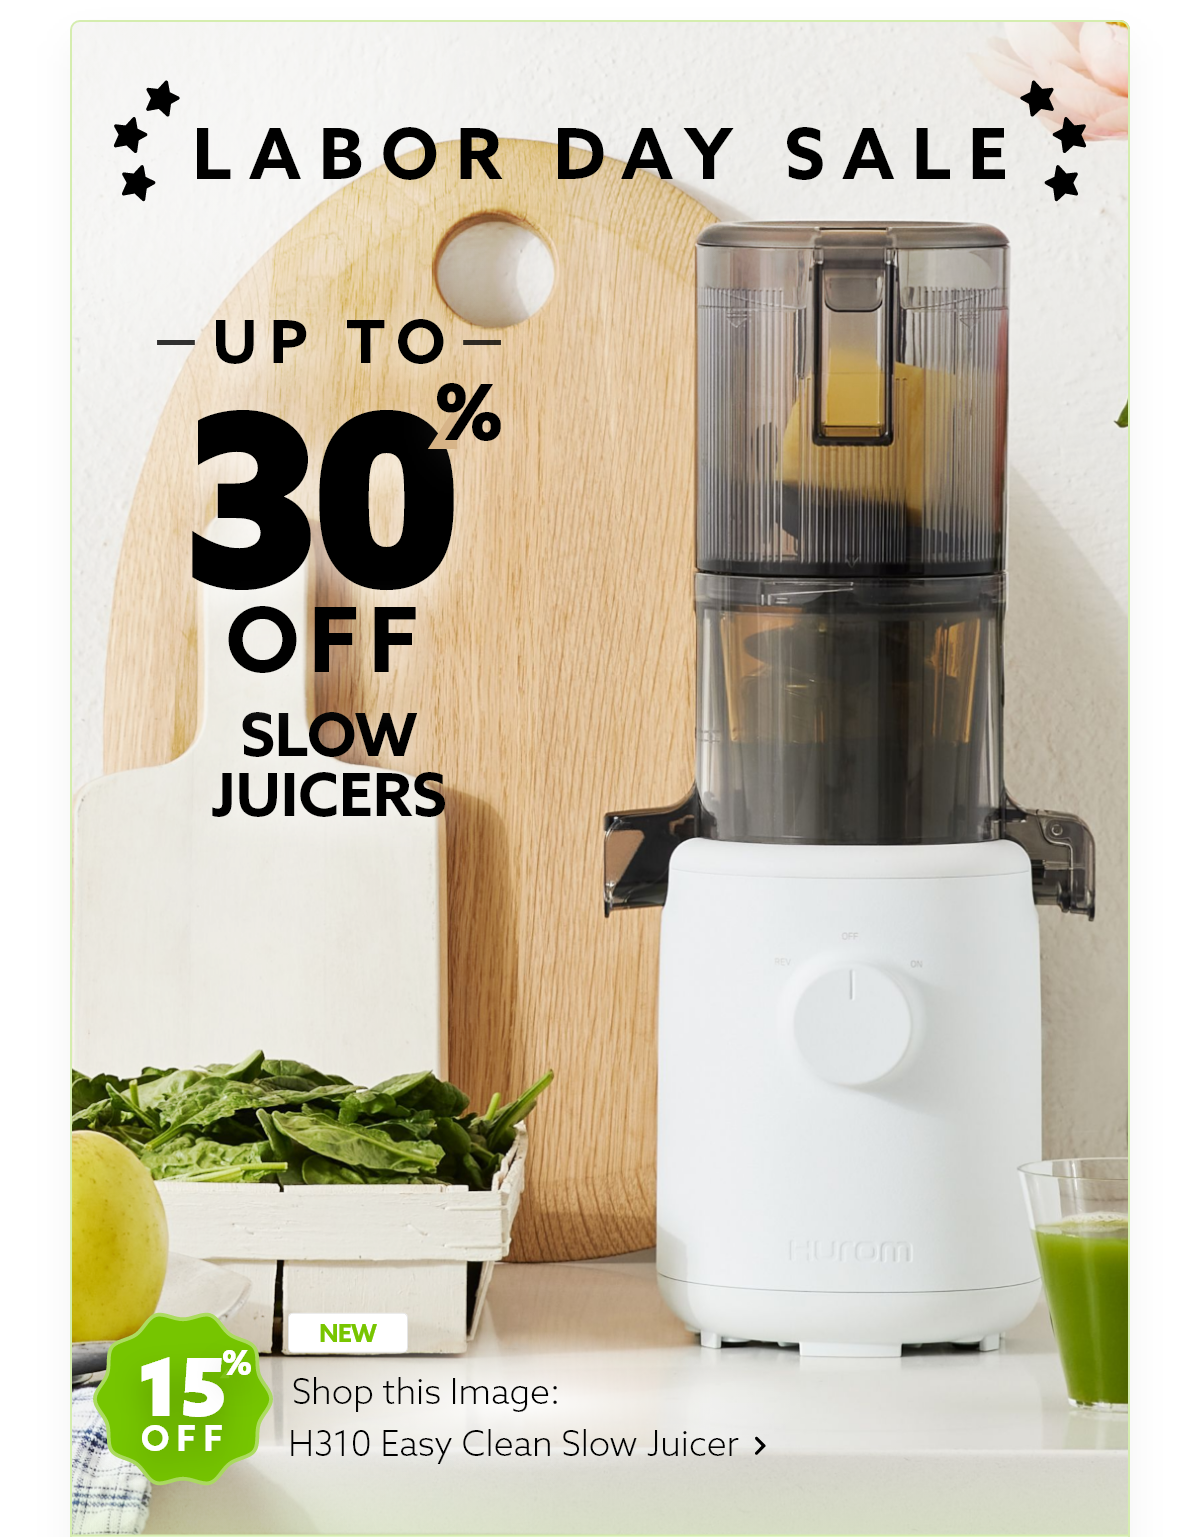 Best juicer deals: Hurom juicers are on sale for up to 35% off